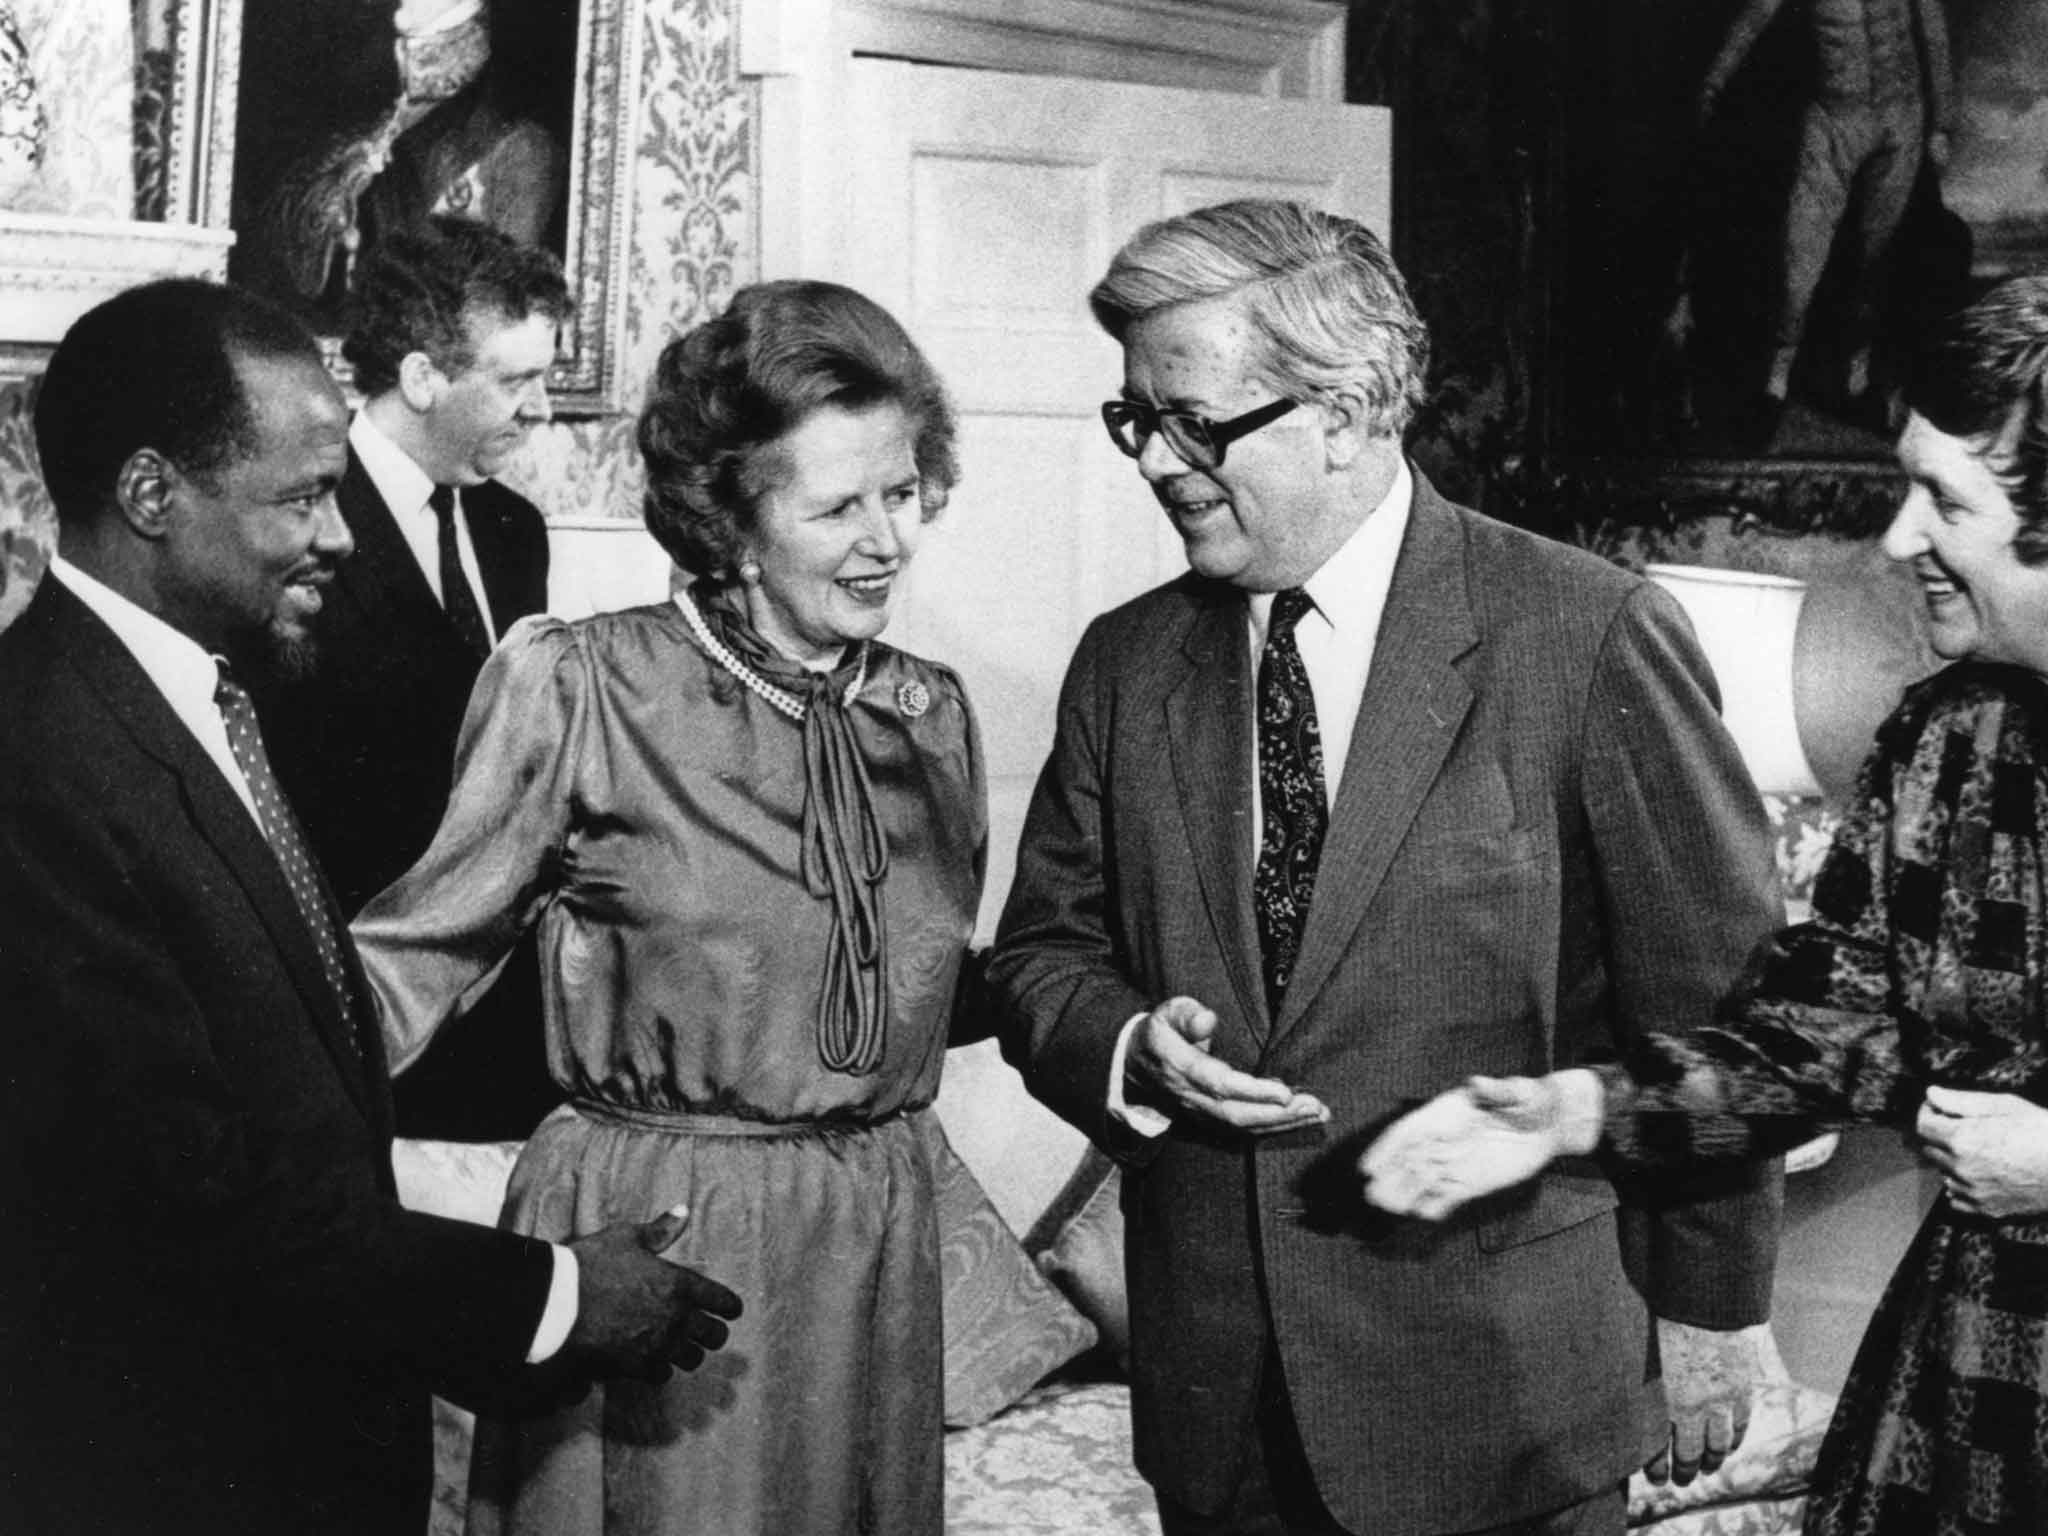 Howe with Margaret Thatcher, during his time as Foreign Secretary